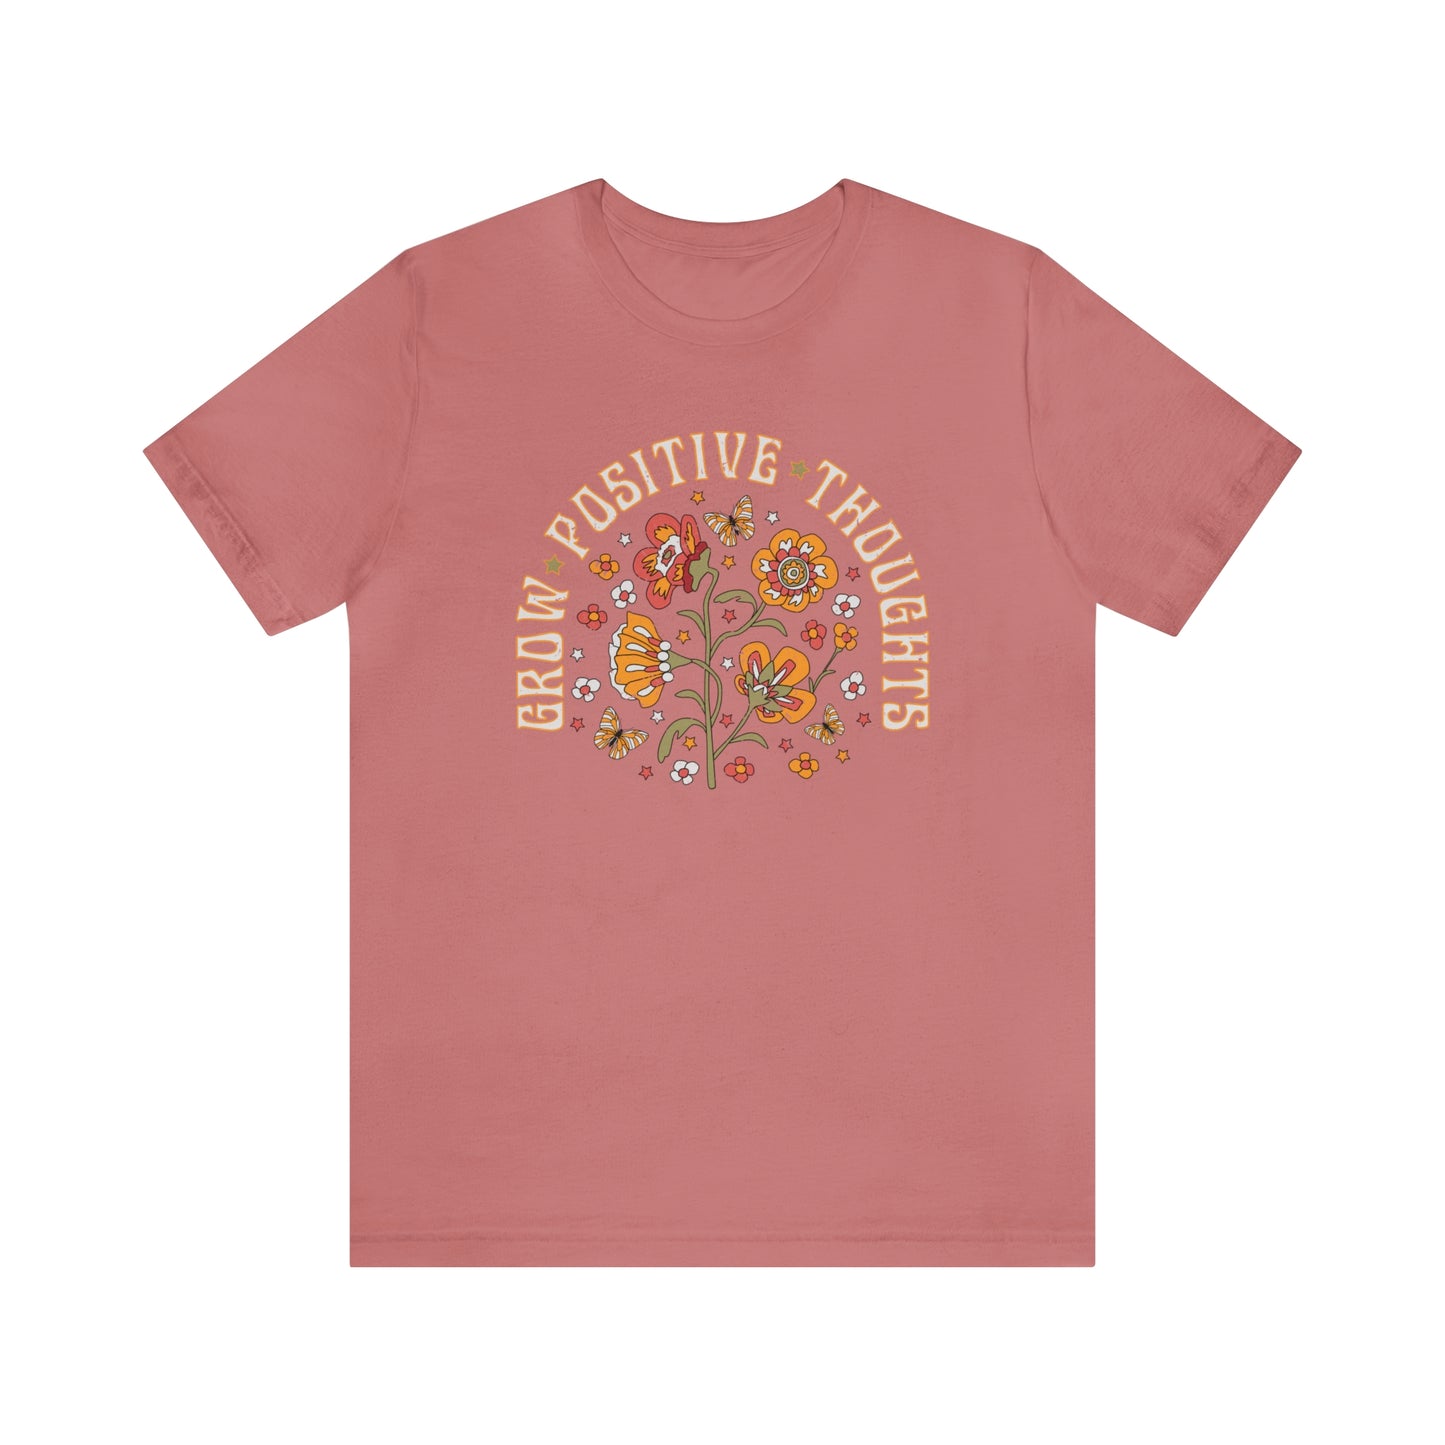 "Grow Positive Thoughts" Bella Canvas Short Sleeve Tee